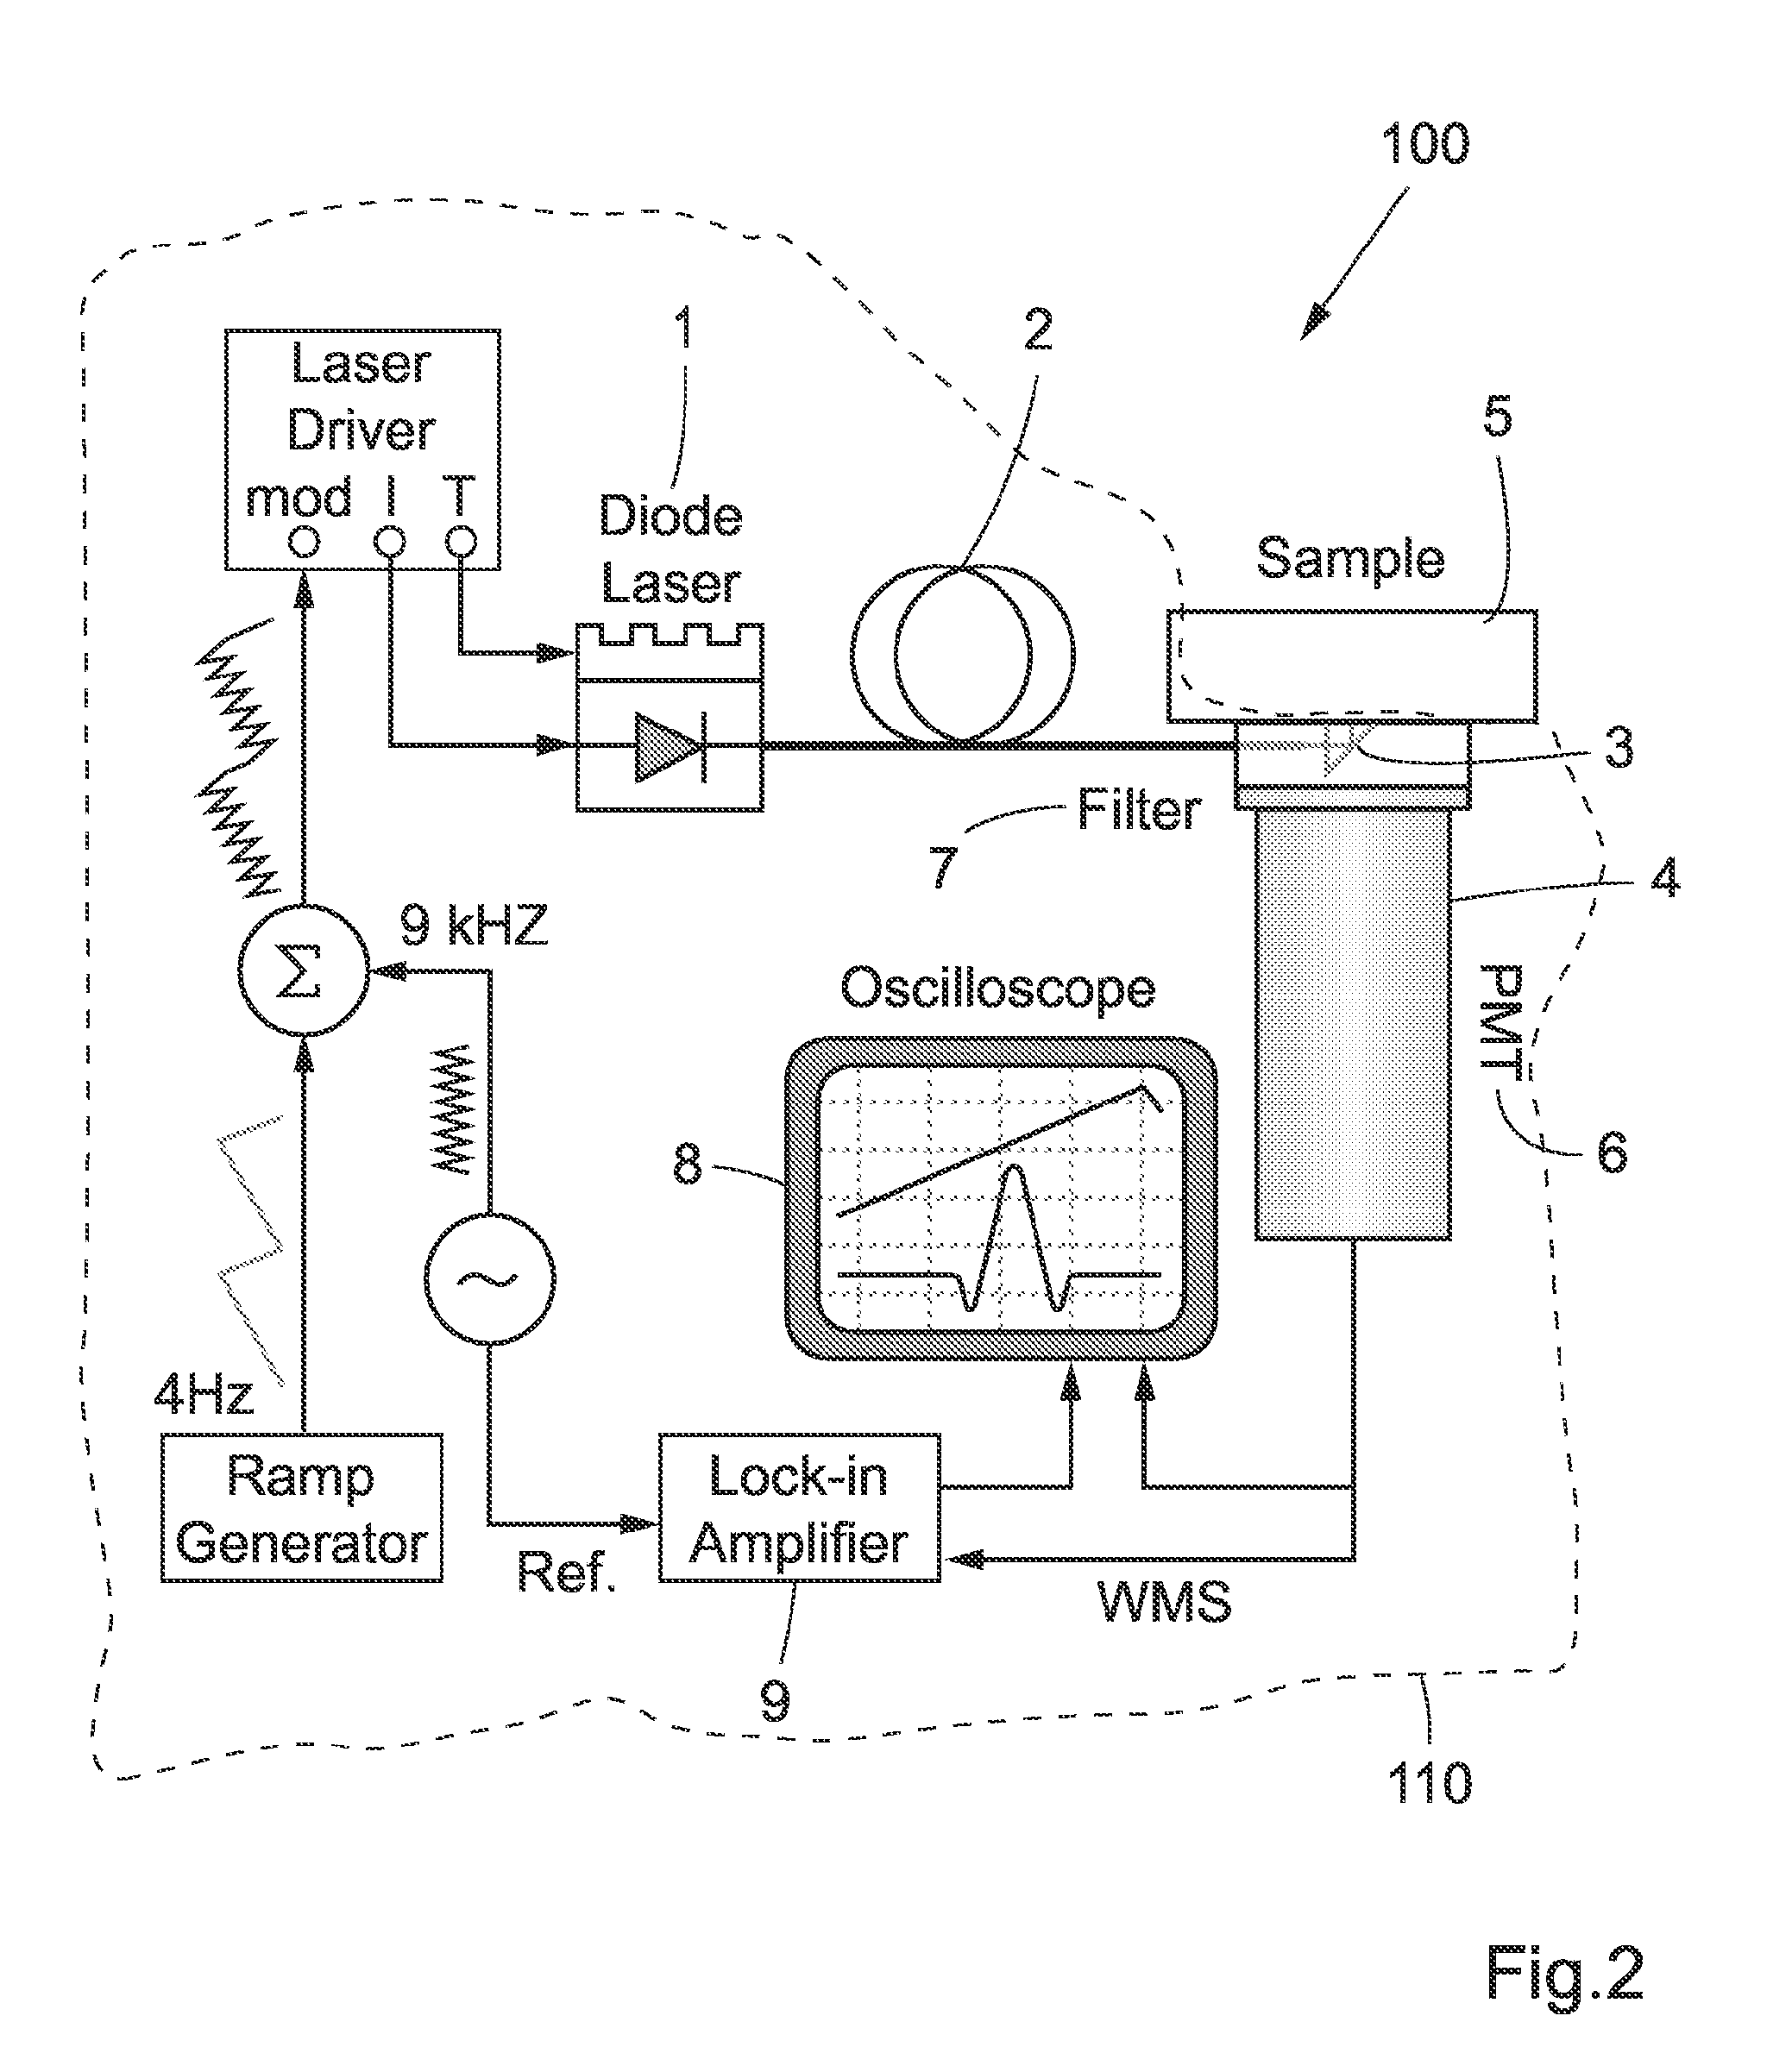 Human cavity gas measurement device and method